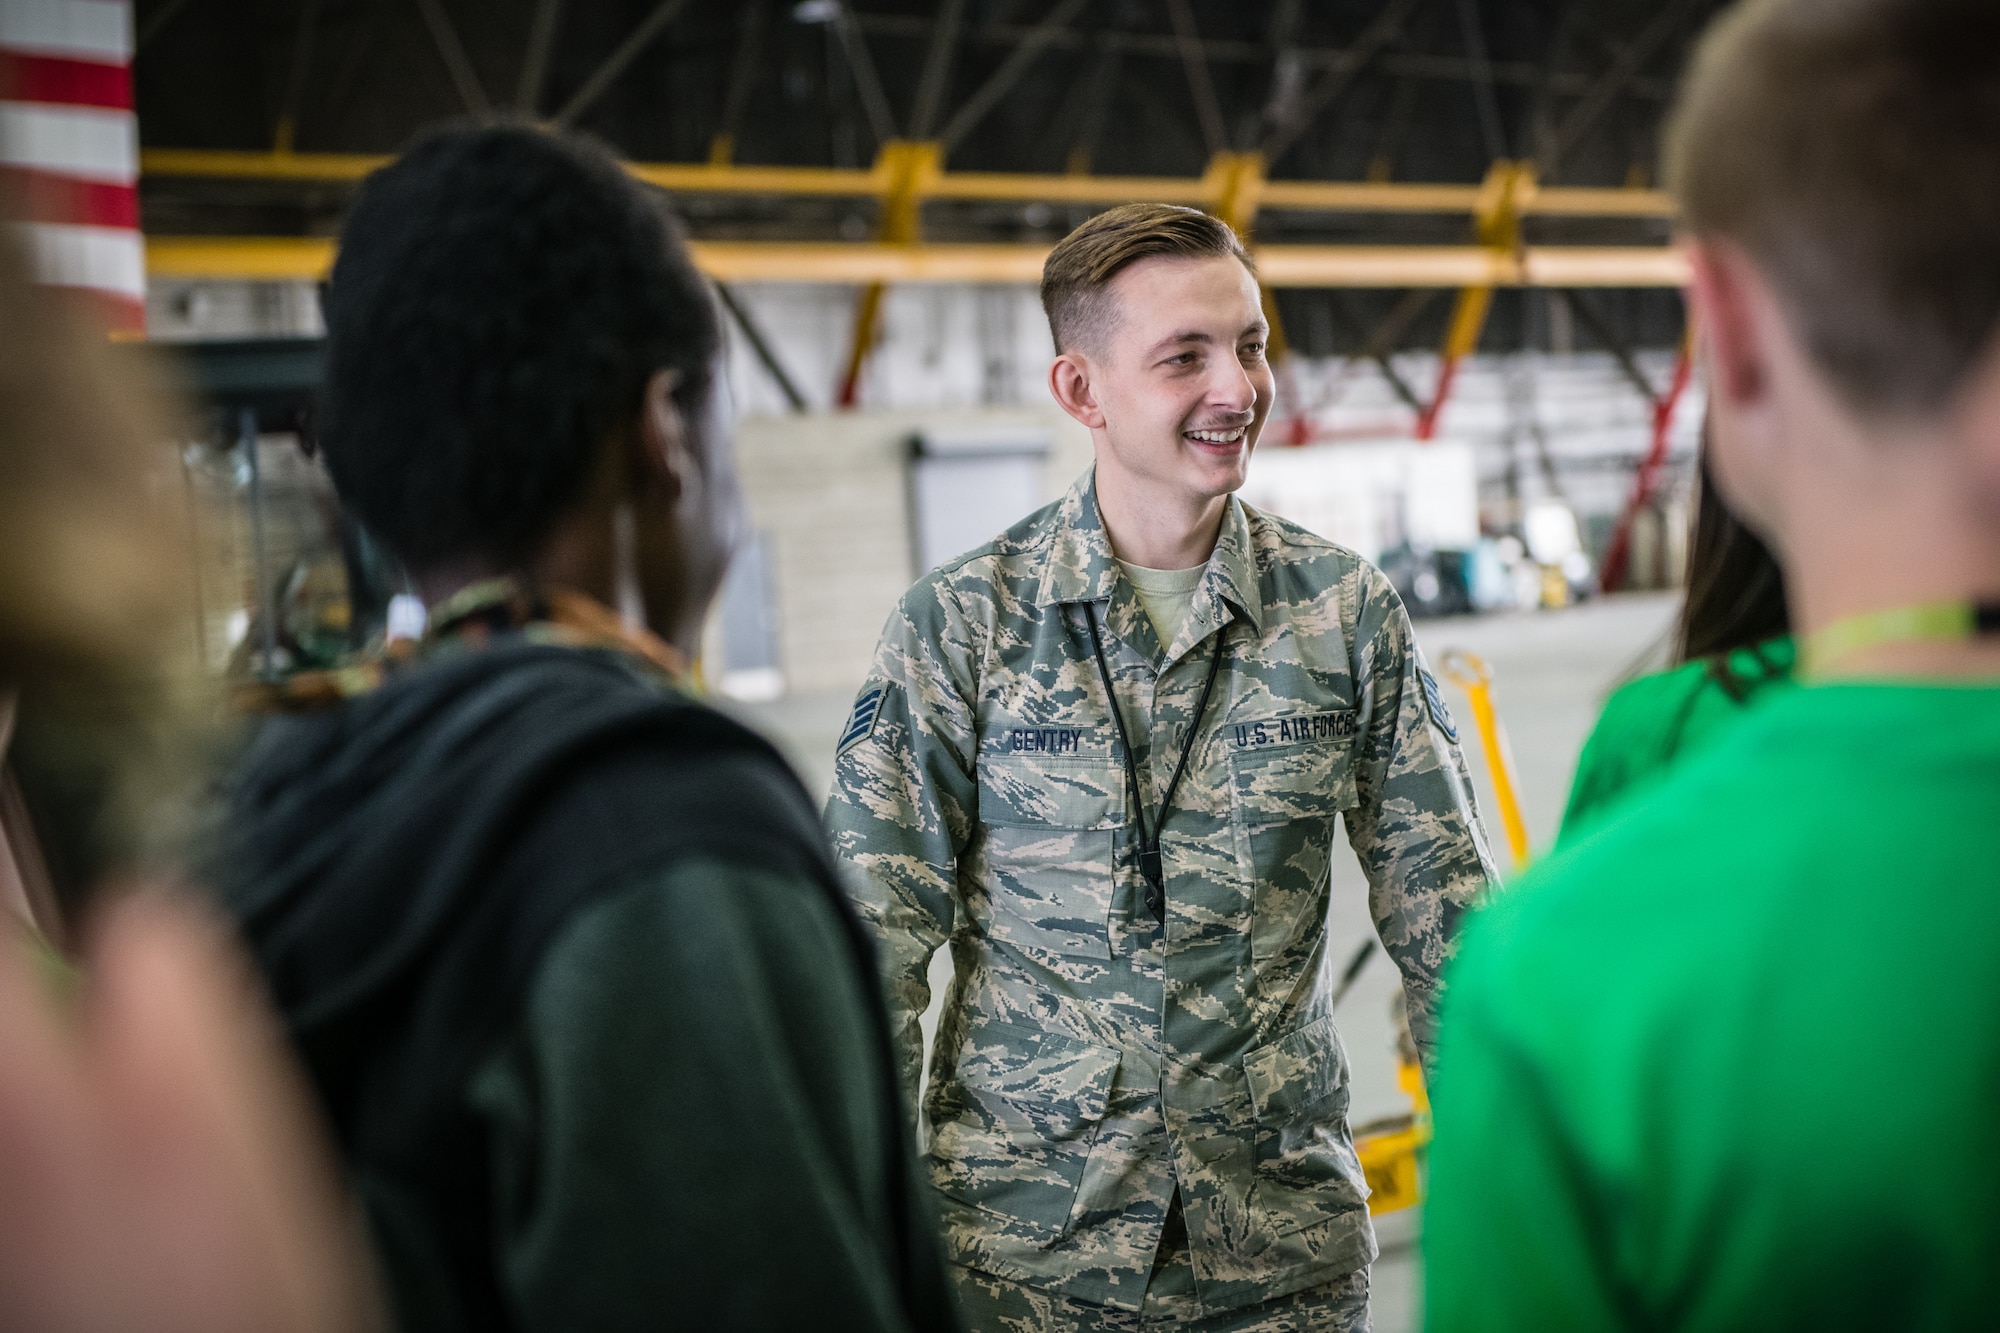 Staff Sgt. Robert Gentry, 932nd Airlift Wing Maintenance Squadron technician, speaks with students about maintenance careers within the Air Force Reserve and challenges students to create and fly paper airplanes during STEAM Day at Scott Air Force Base, Illinois, Nov. 20, 2019. The day inspires kids to explore and pursue their interests in Science, Technology, Engineering, Art and Math.  (U.S. Air Force photo by Christopher Parr)